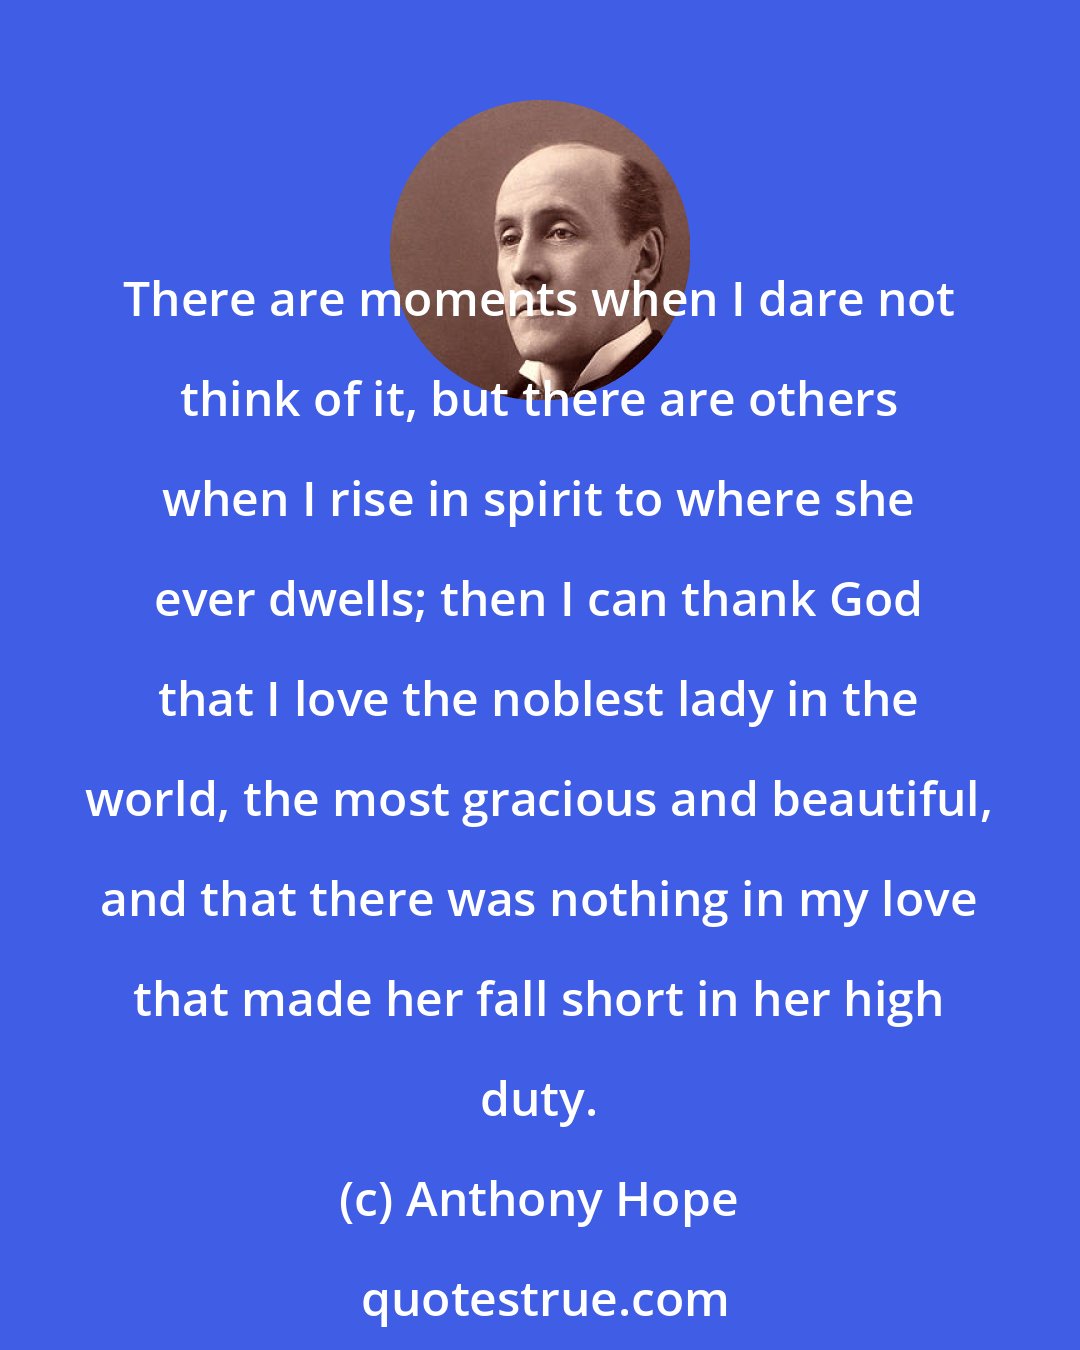 Anthony Hope: There are moments when I dare not think of it, but there are others when I rise in spirit to where she ever dwells; then I can thank God that I love the noblest lady in the world, the most gracious and beautiful, and that there was nothing in my love that made her fall short in her high duty.